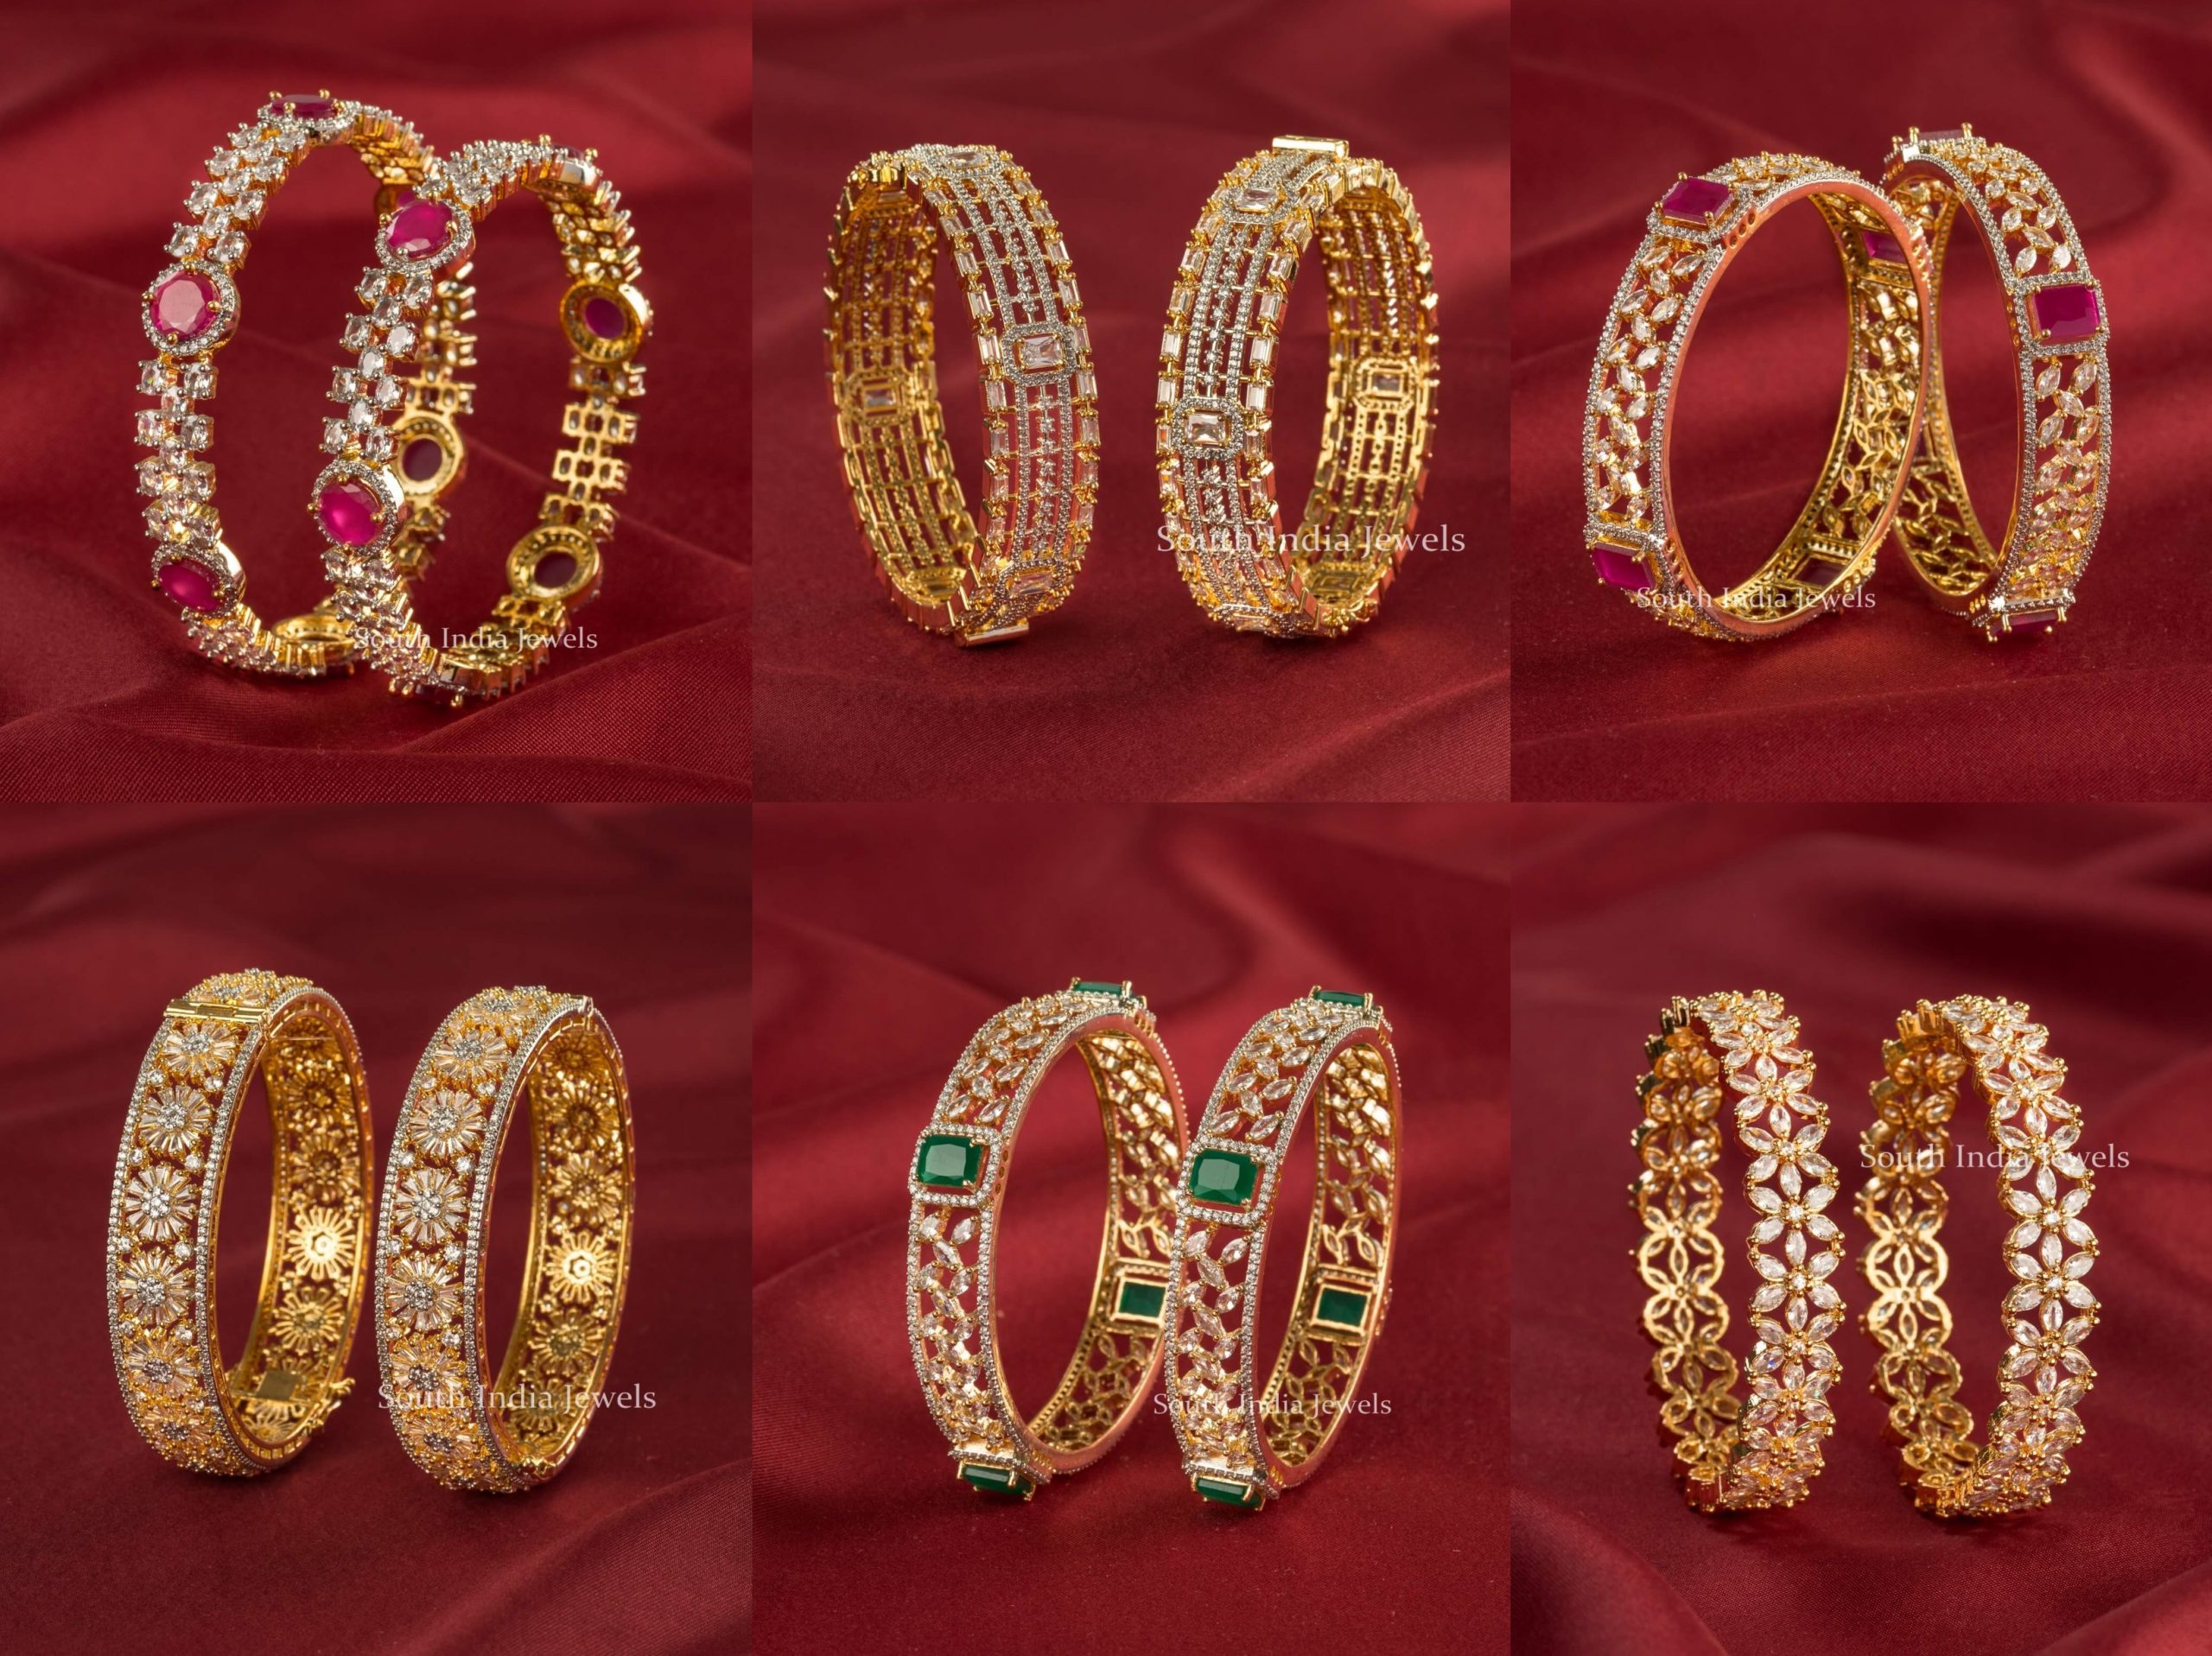 Stunning AD Bangles For Festivals By South India Jewels!